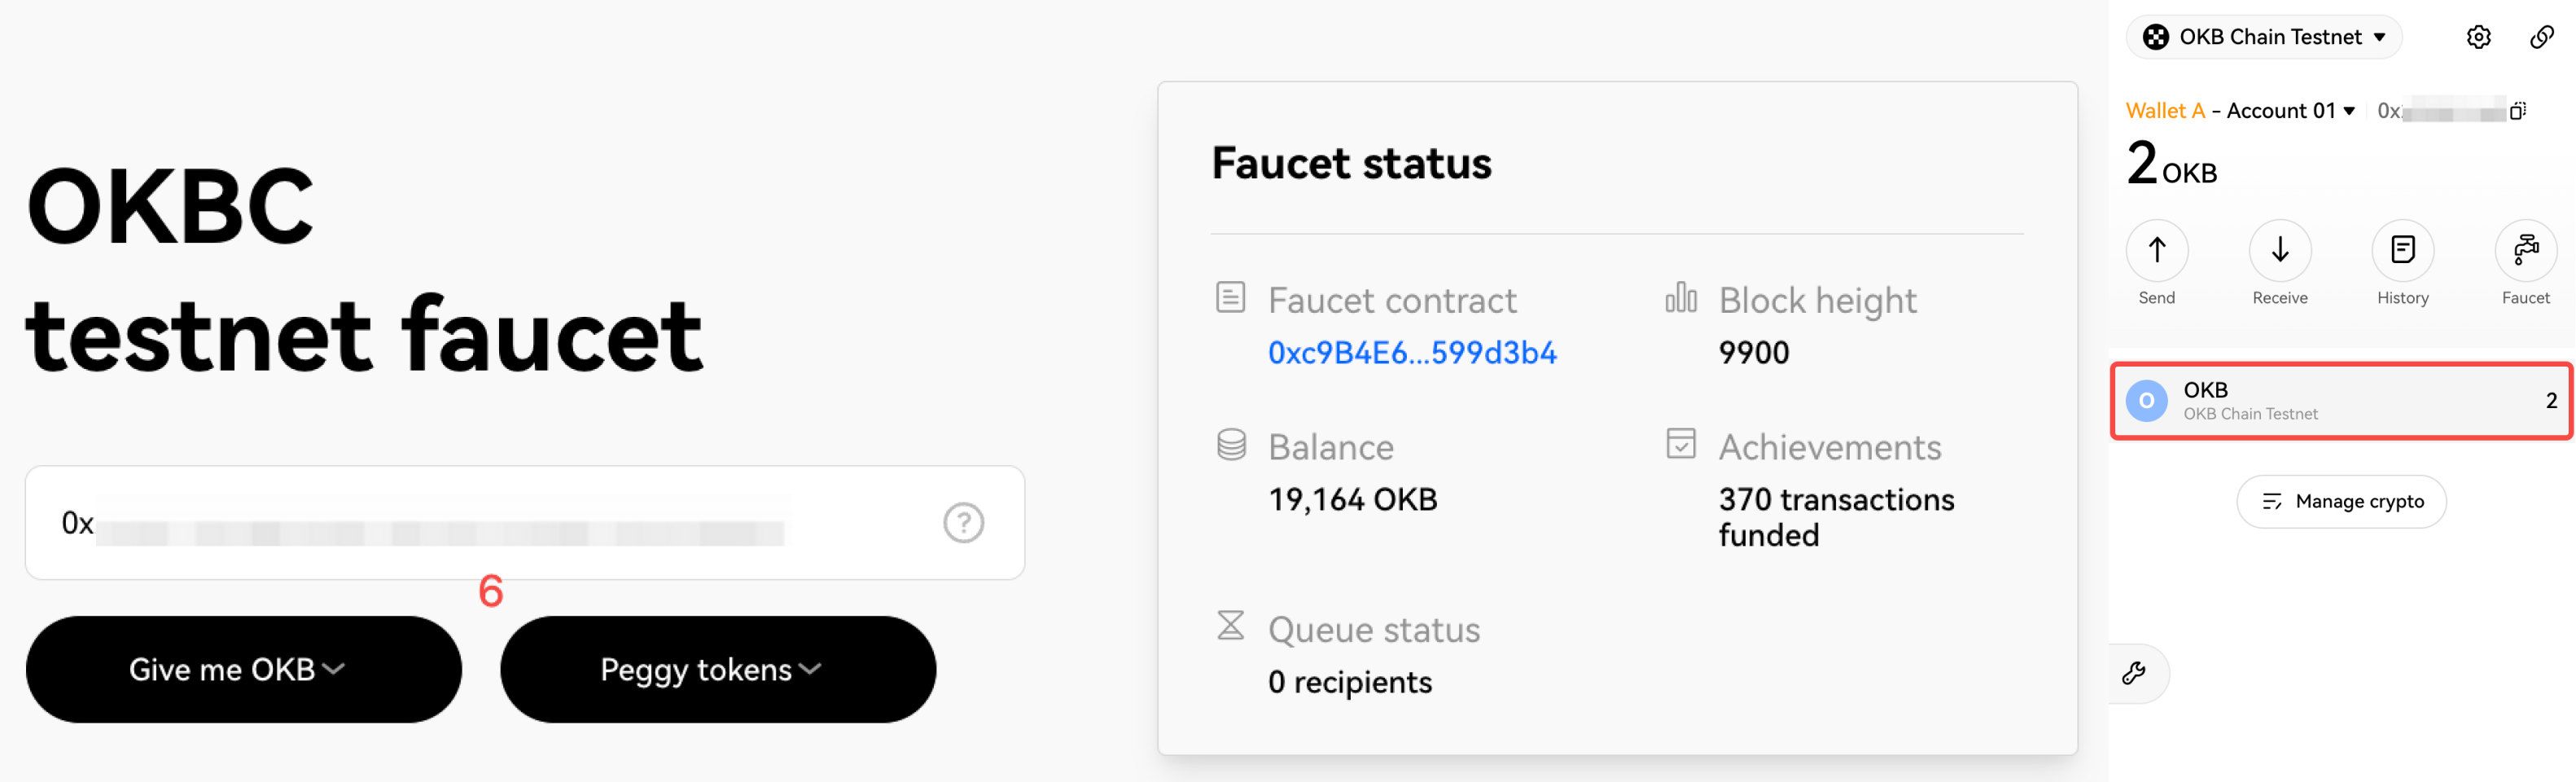 how-to-get-okb-chain-testnet-faucet image 4